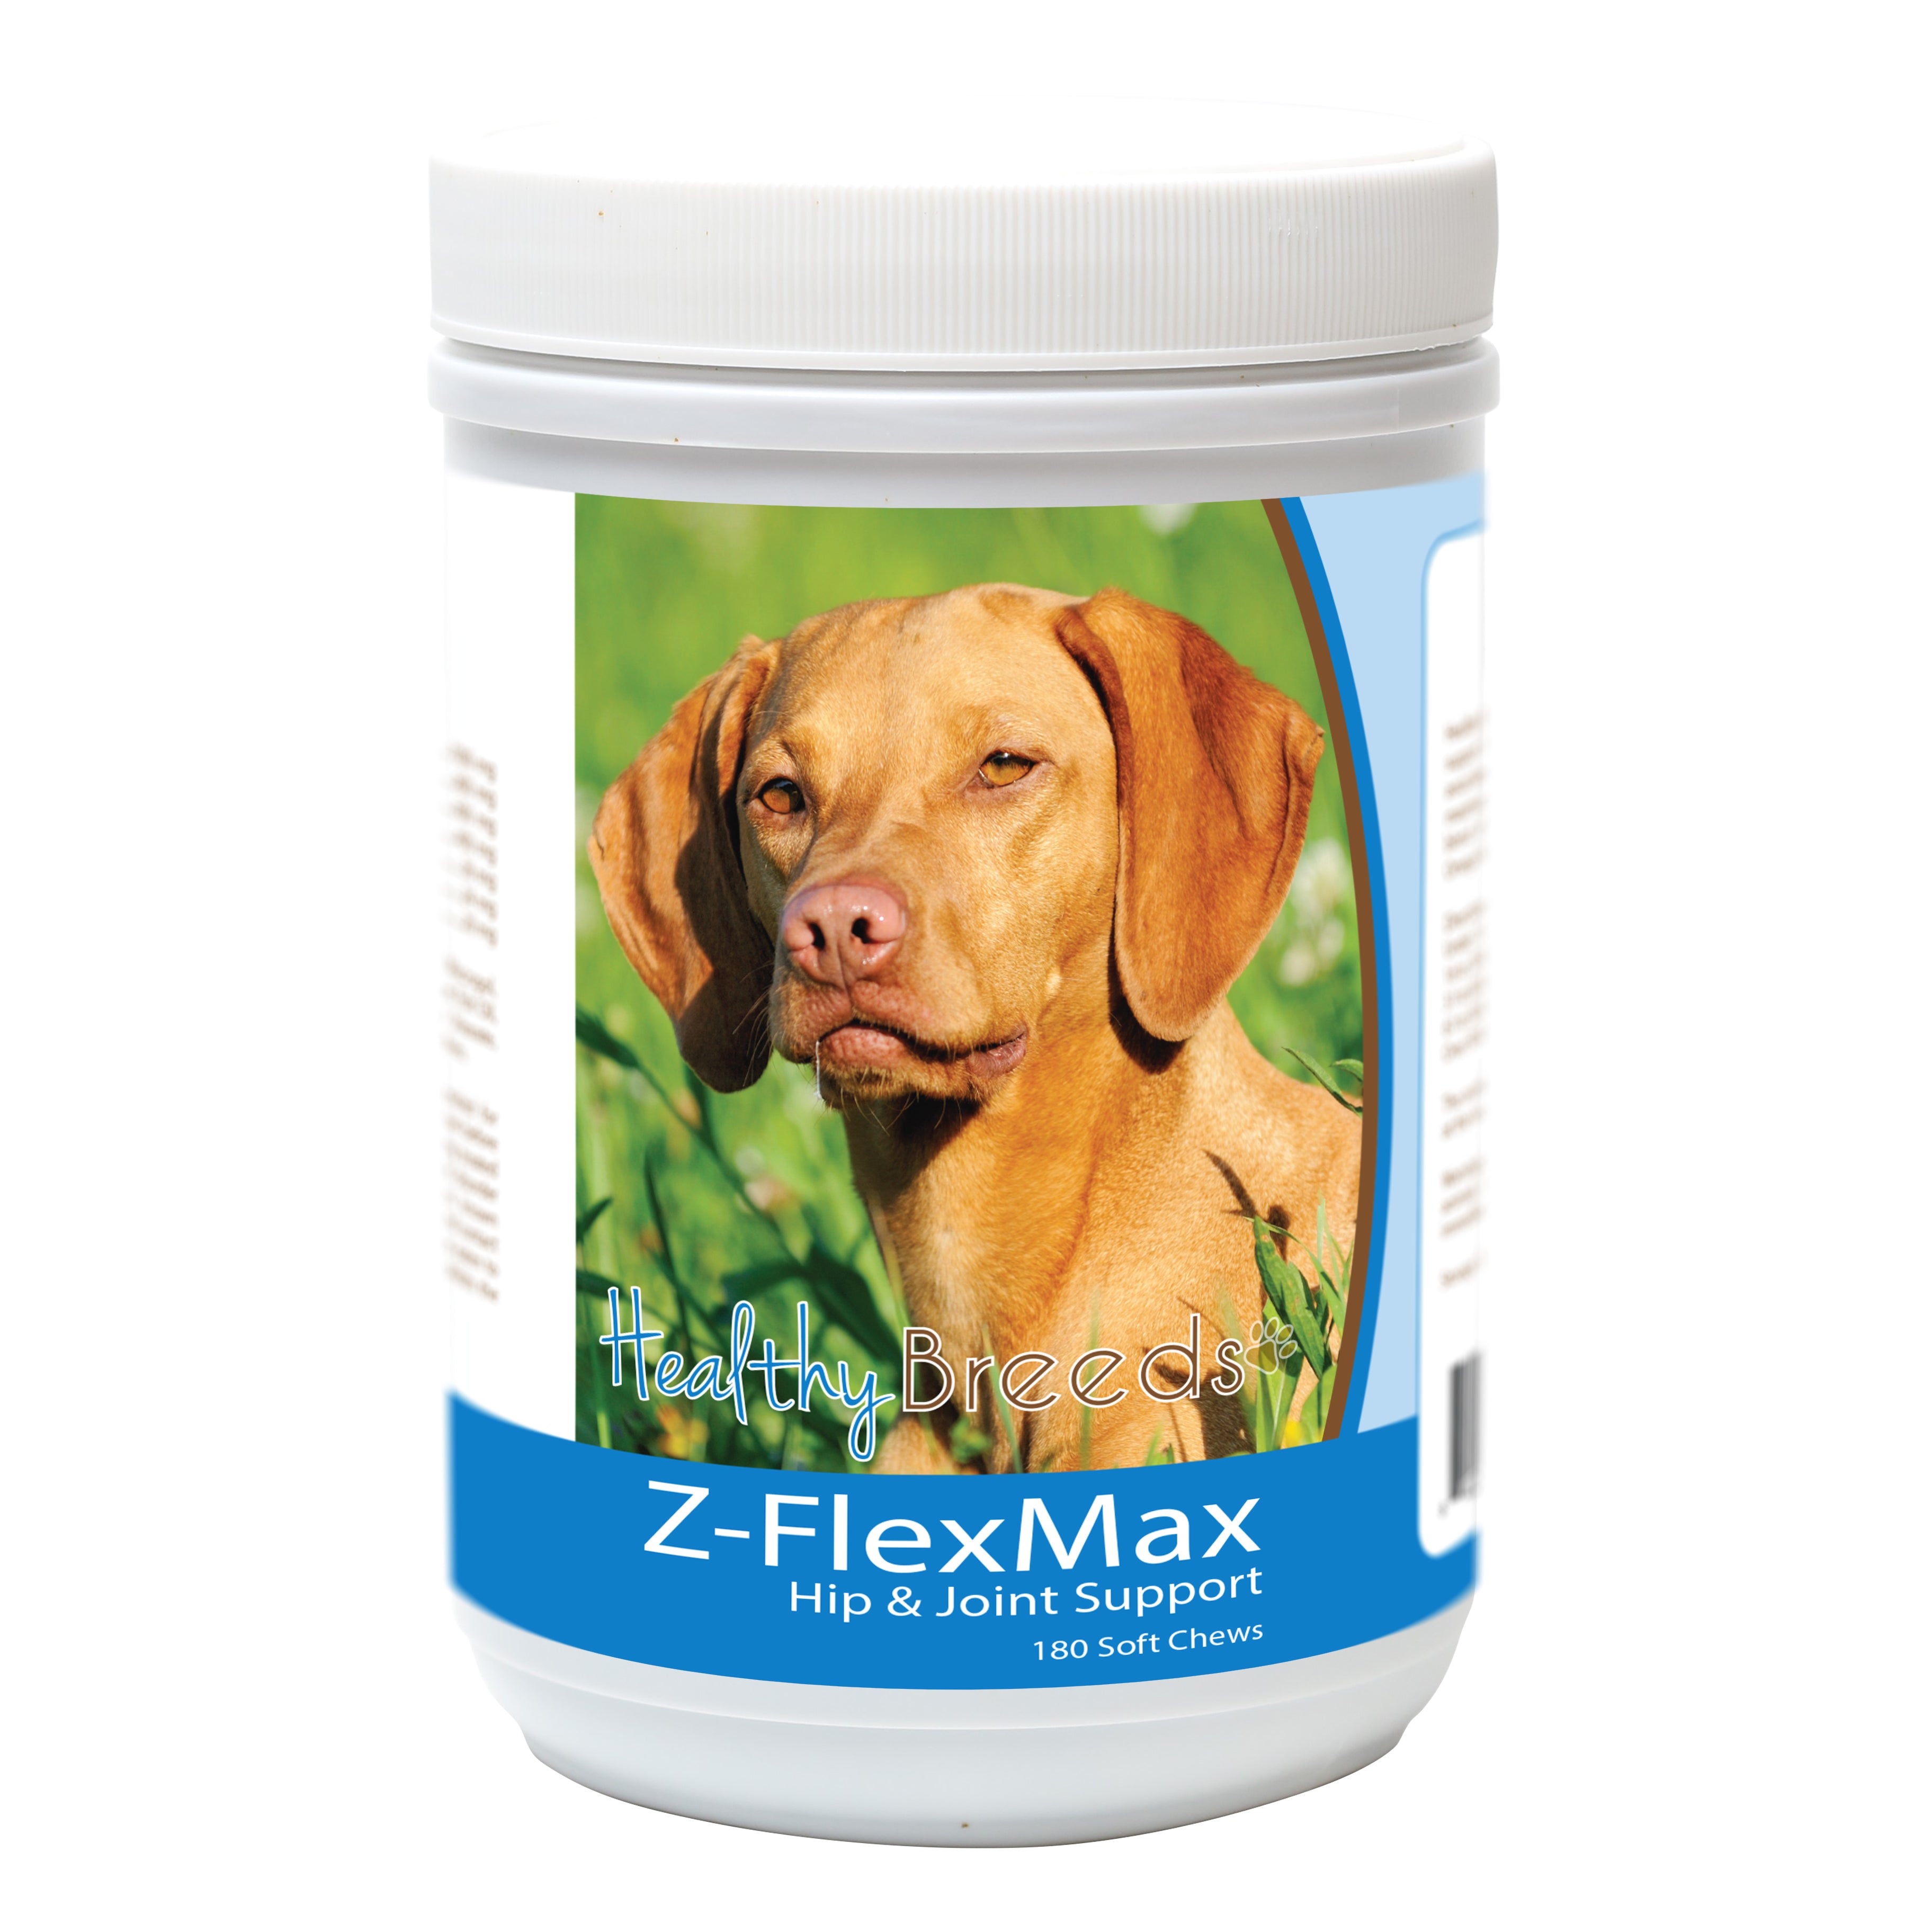 Vizsla Z-Flex Max Dog Hip and Joint Support 180 Count